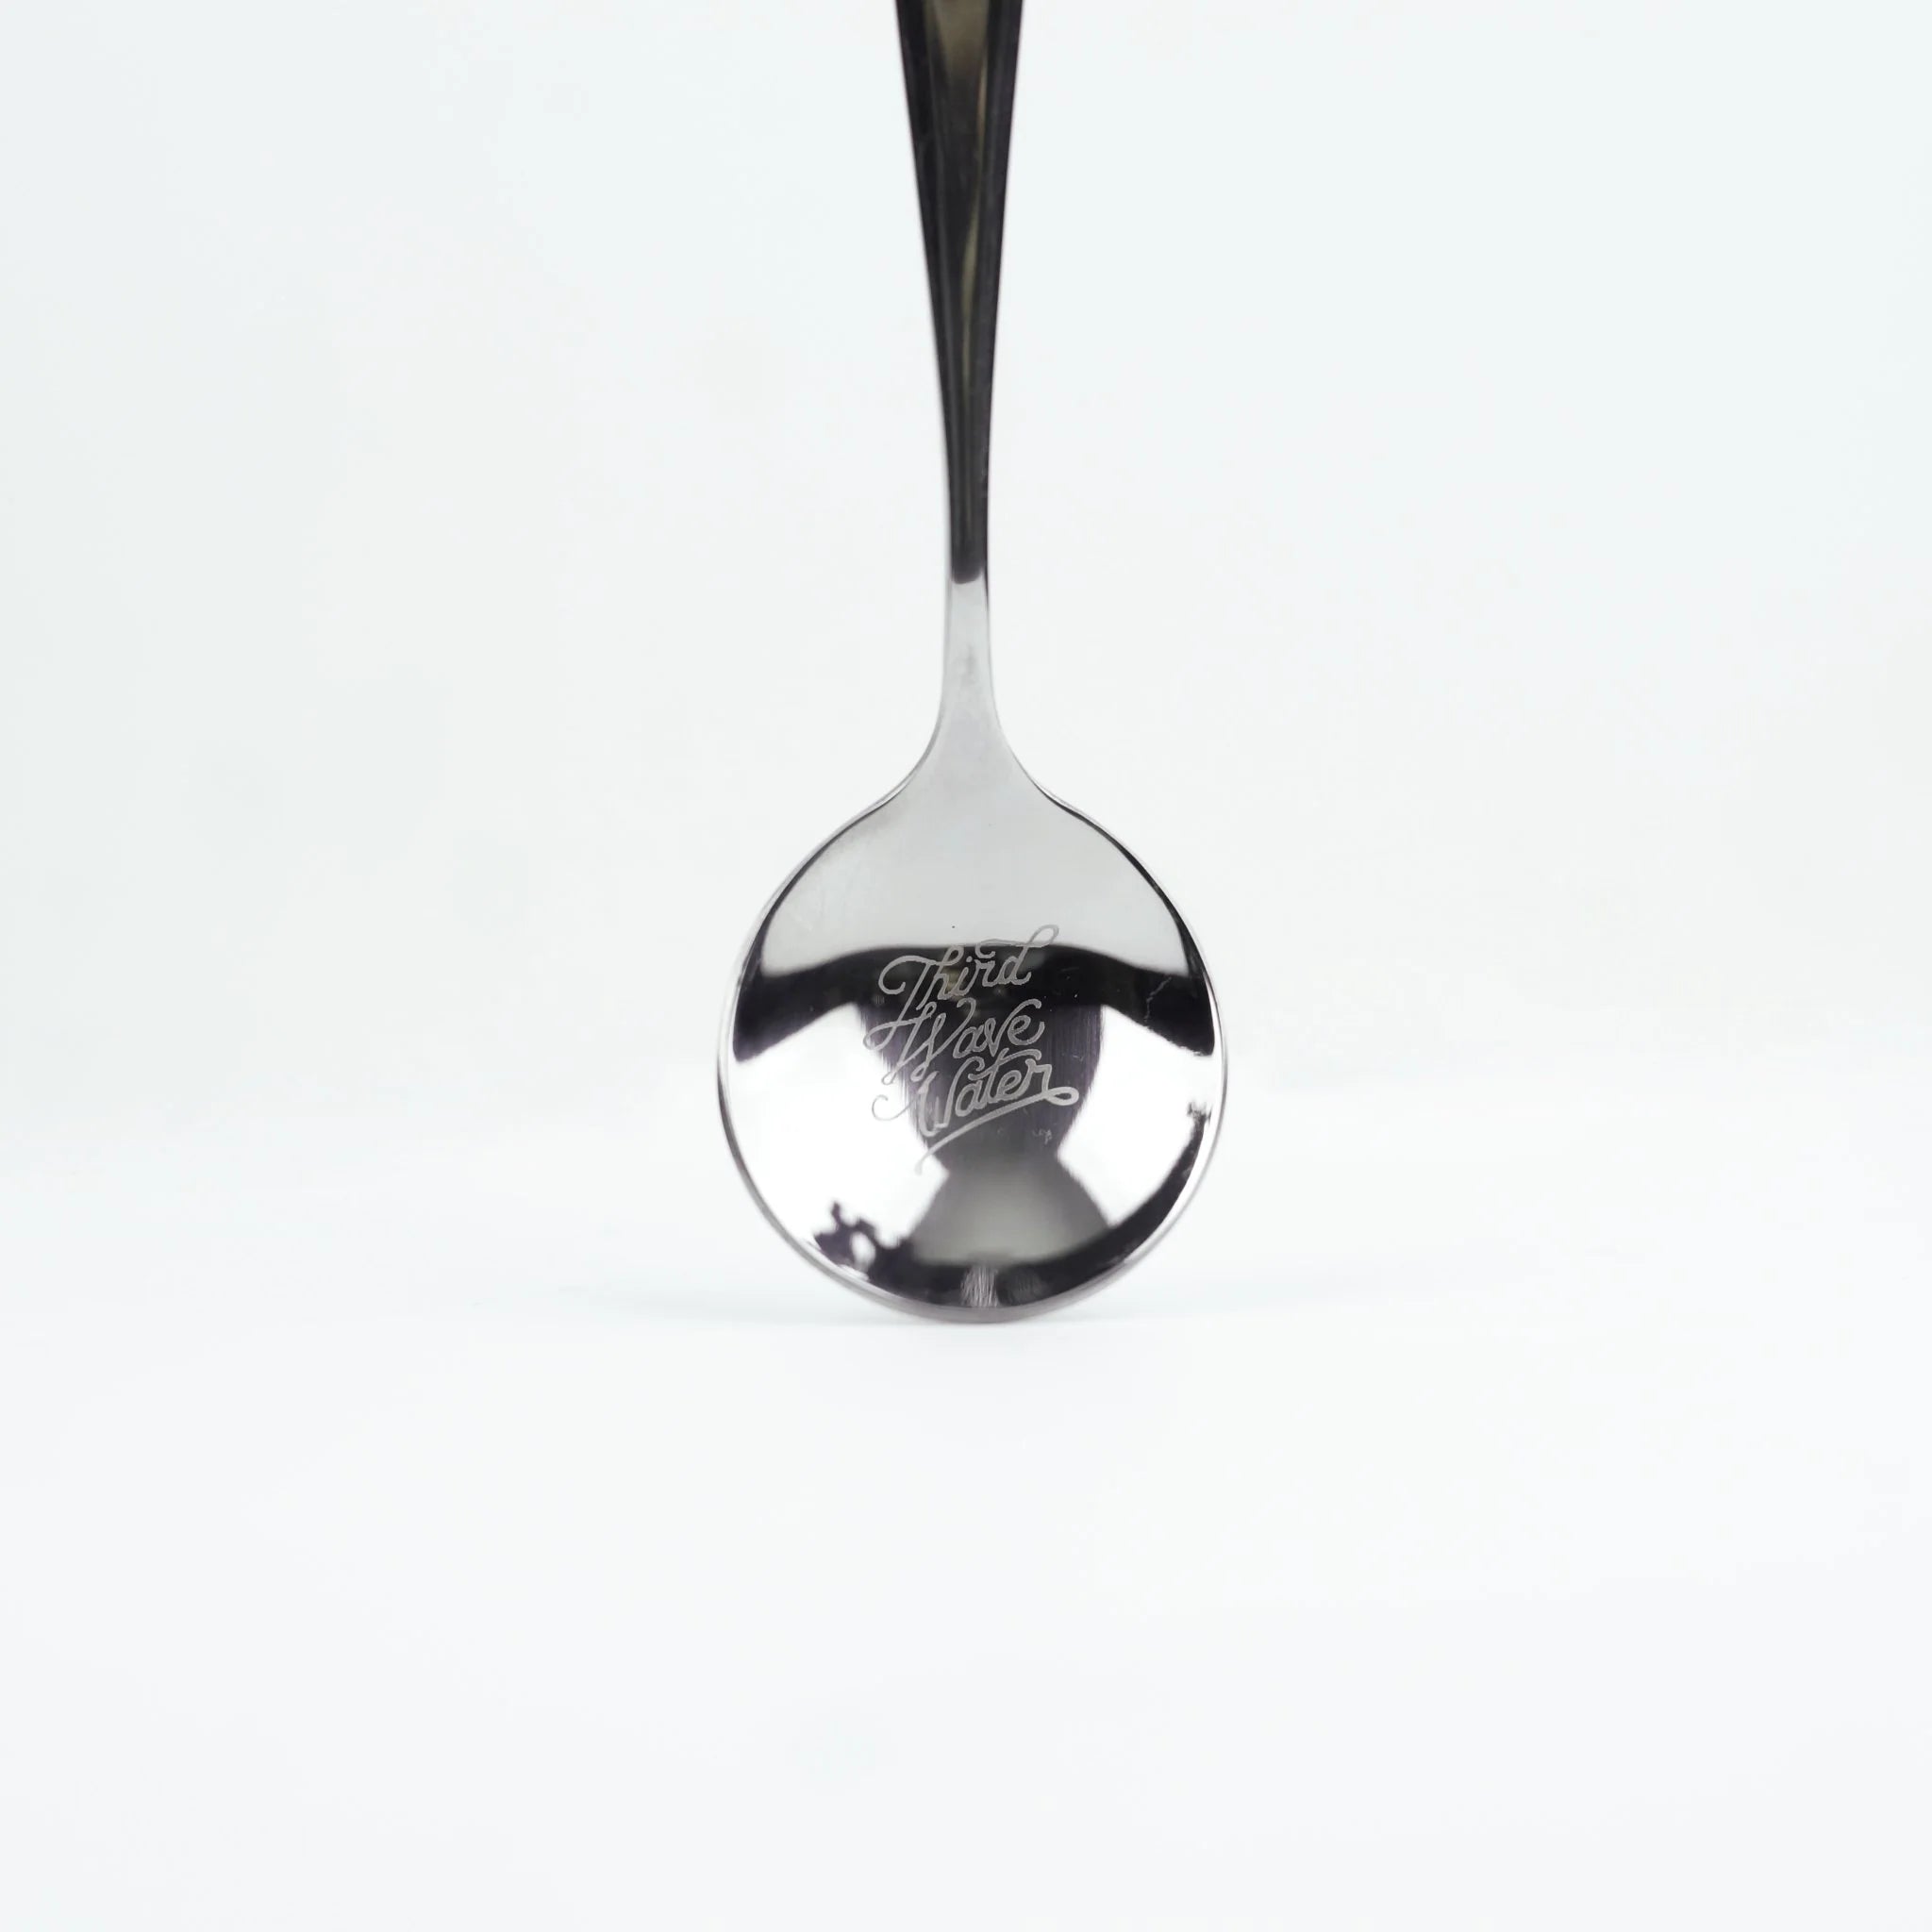 Coffee cupping spoon, Stainless Steel